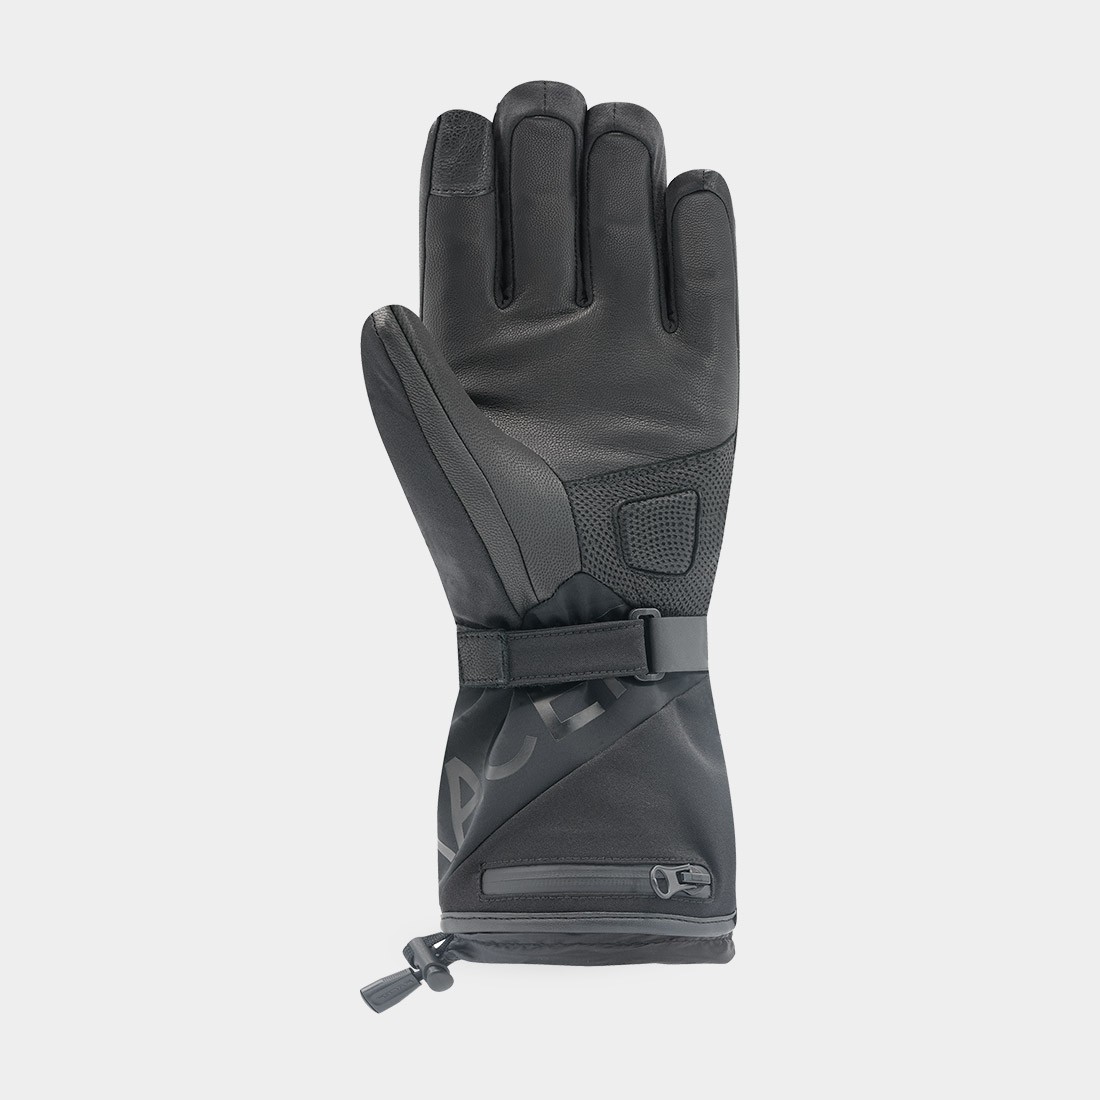 connectic-5-heated-gloves-2